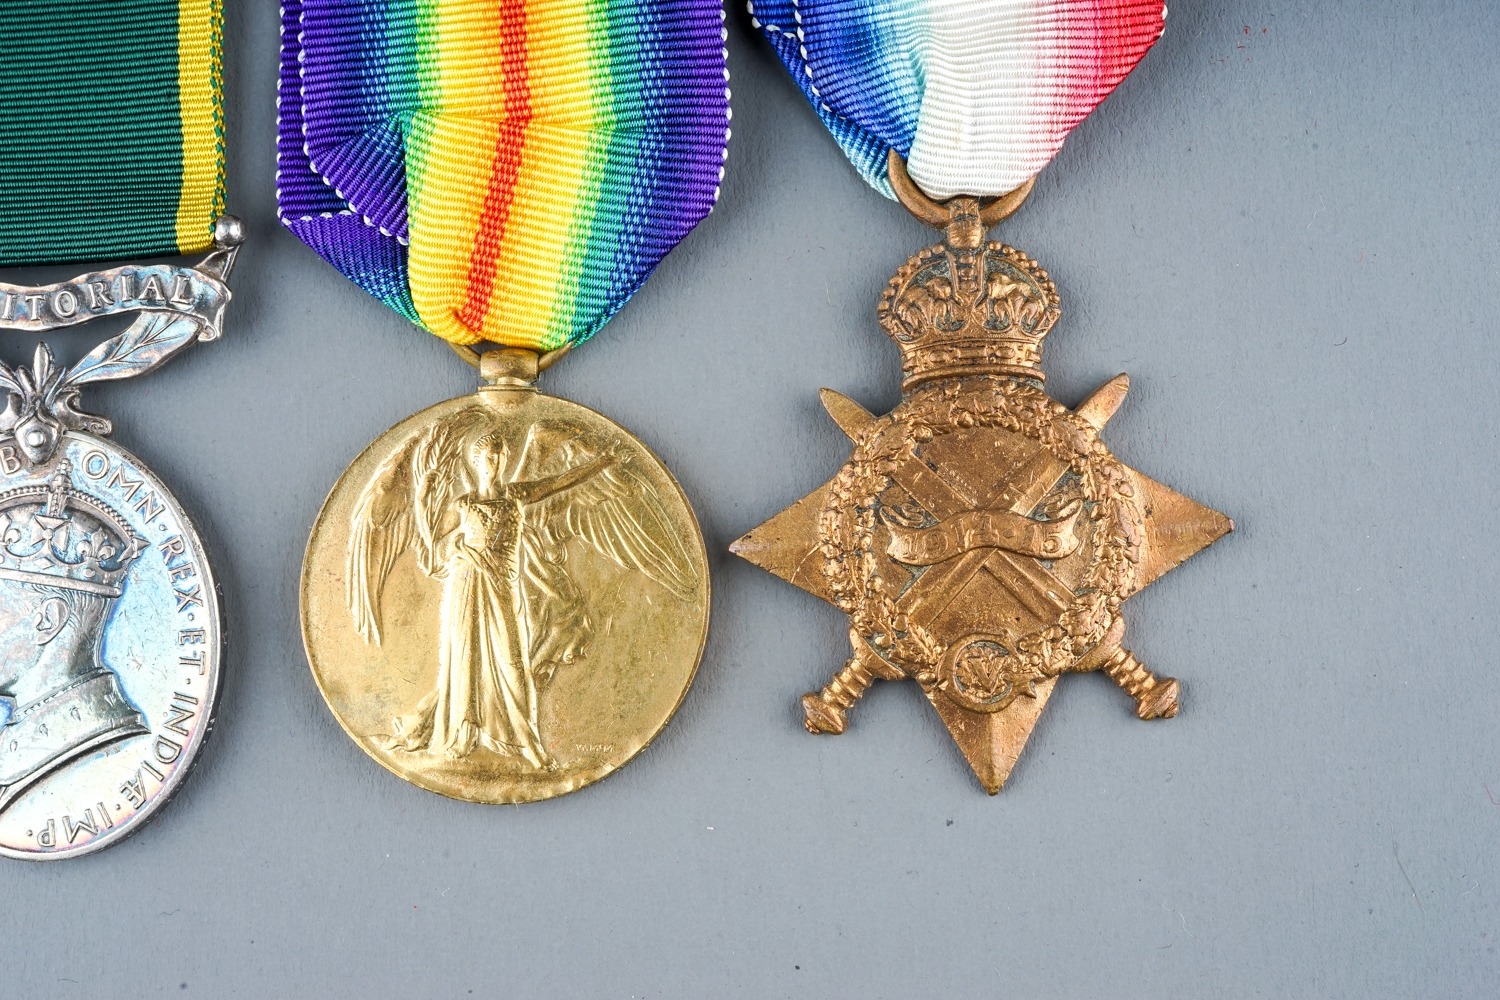 A collection of British Medals. Great War Pair - R-29124 A Cpl H H Simpkins K R Rif C. Condition - Image 7 of 12